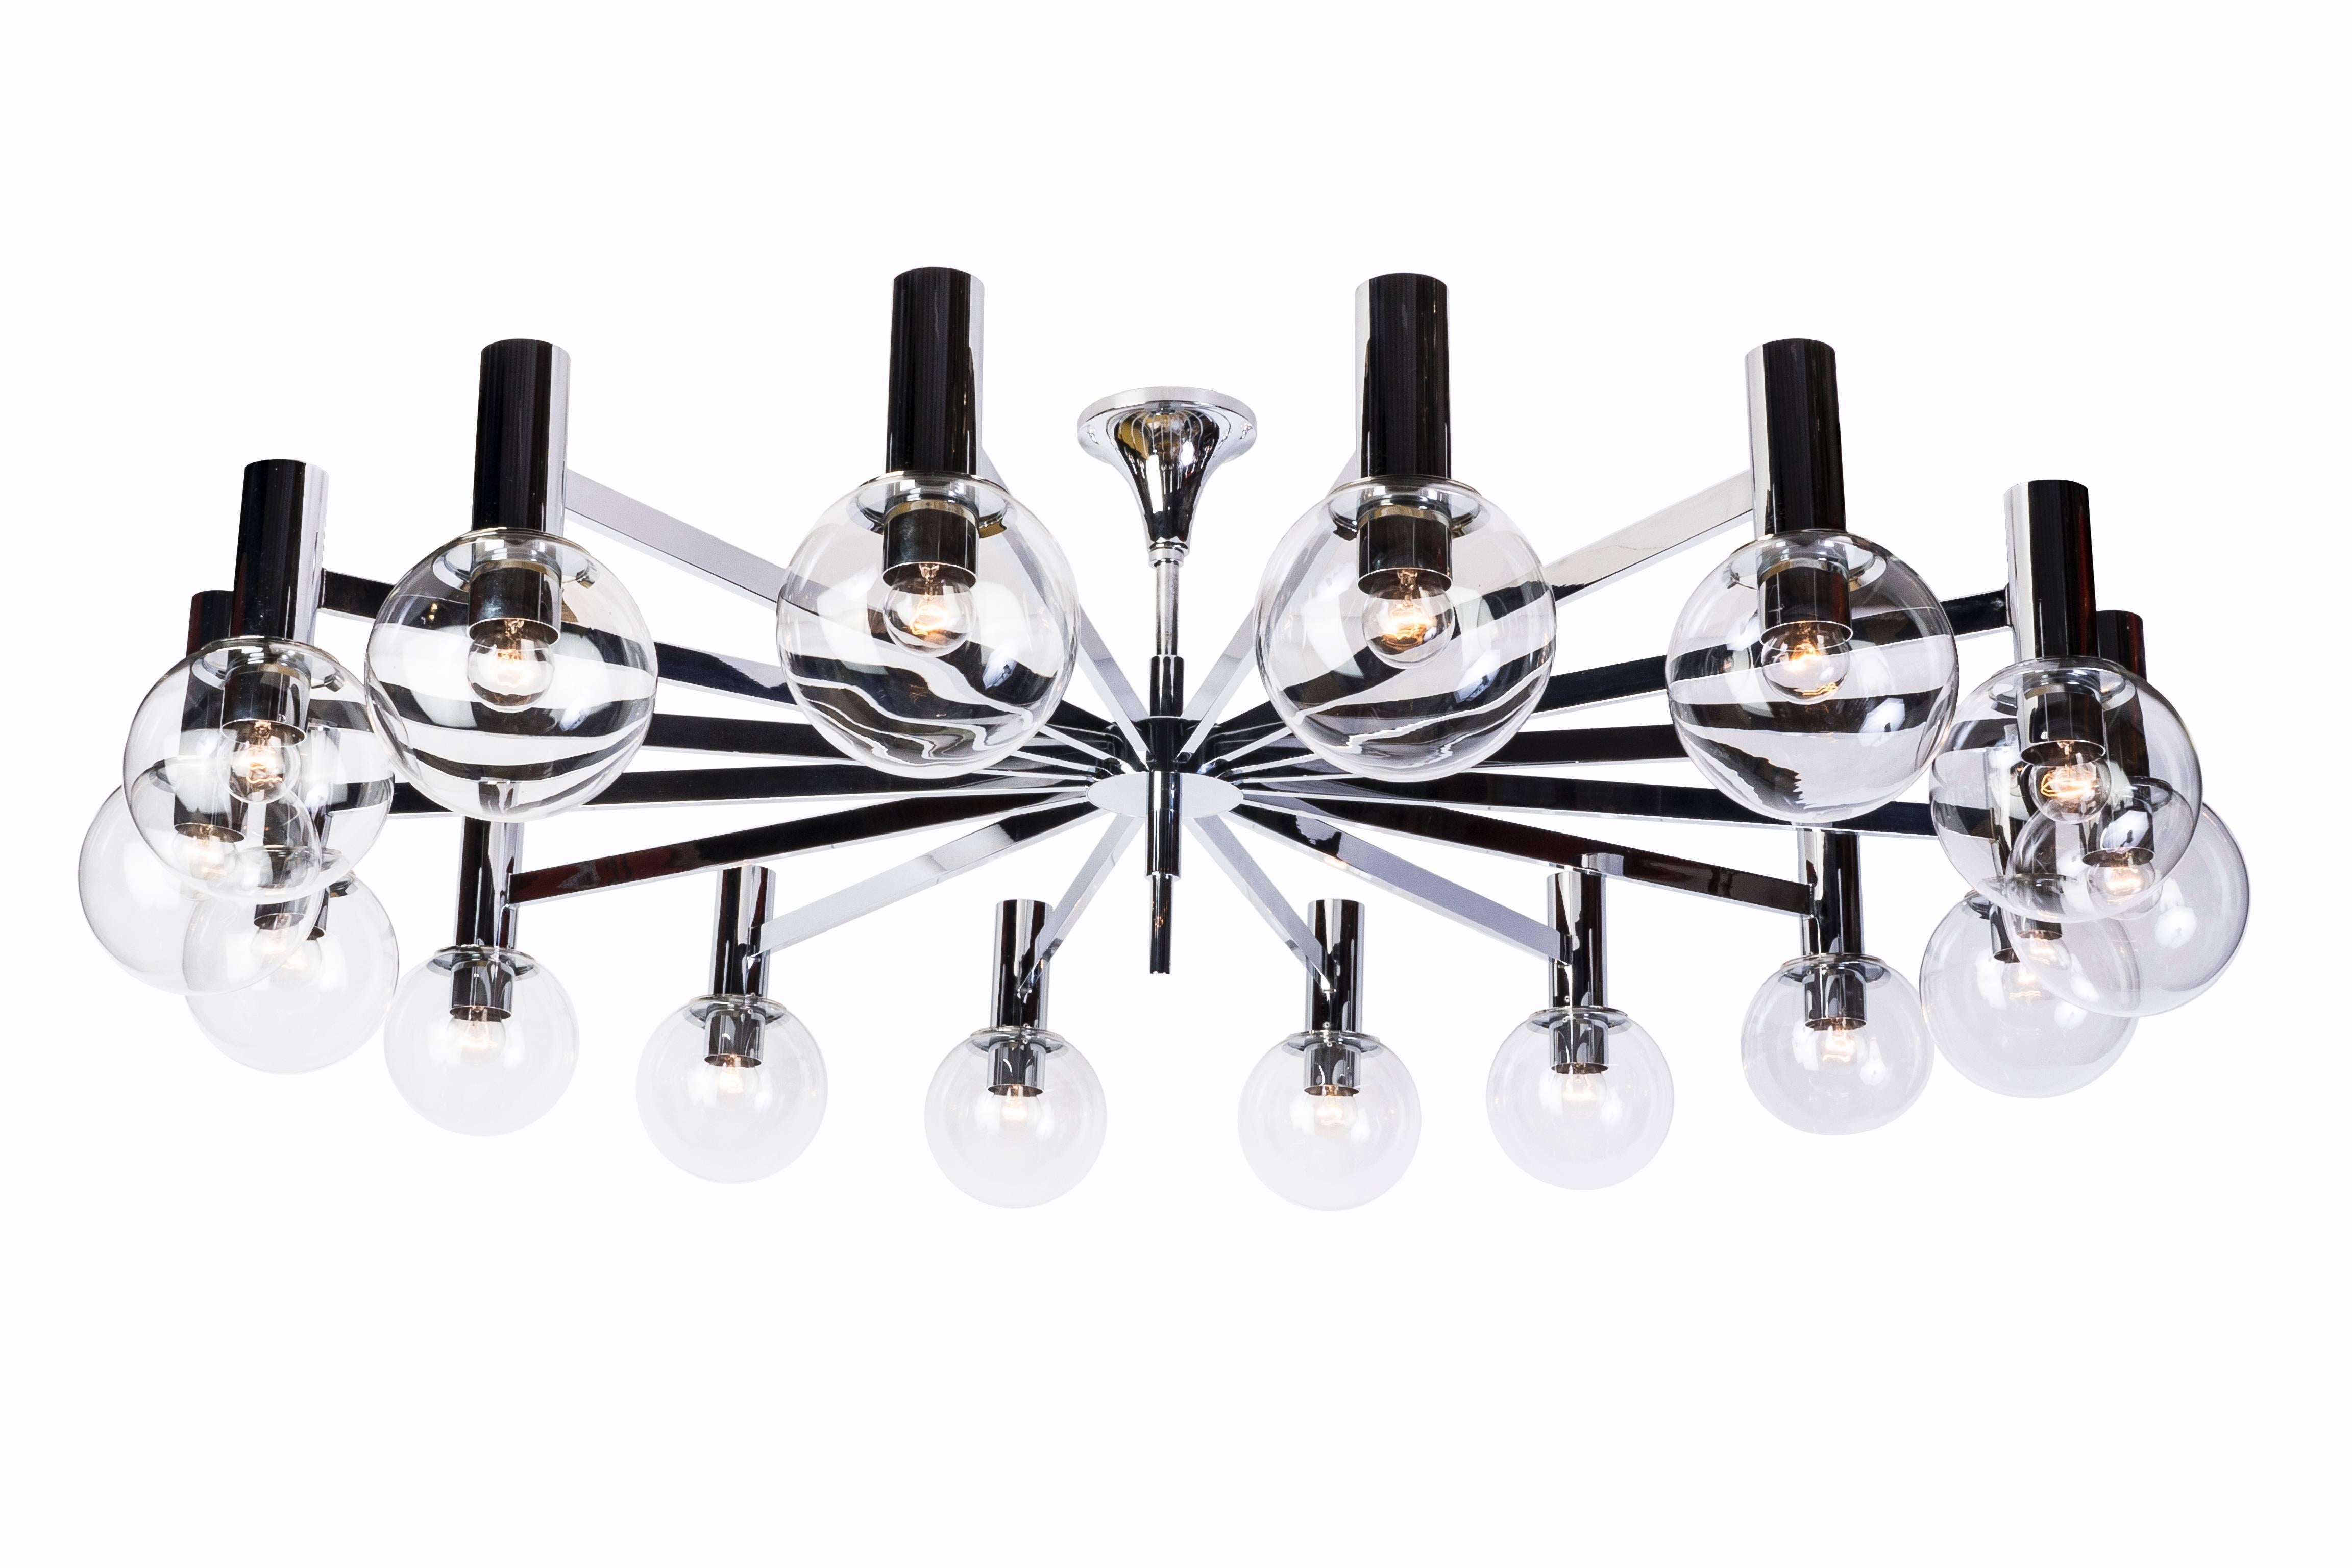 This stunning (16) light Sputnik chandelier by Hans-Agne Jakobsson features a beautiful streamline chrome frame and fine clear glass globes. The chandelier is in excellent, original condition and has been newly rewired.